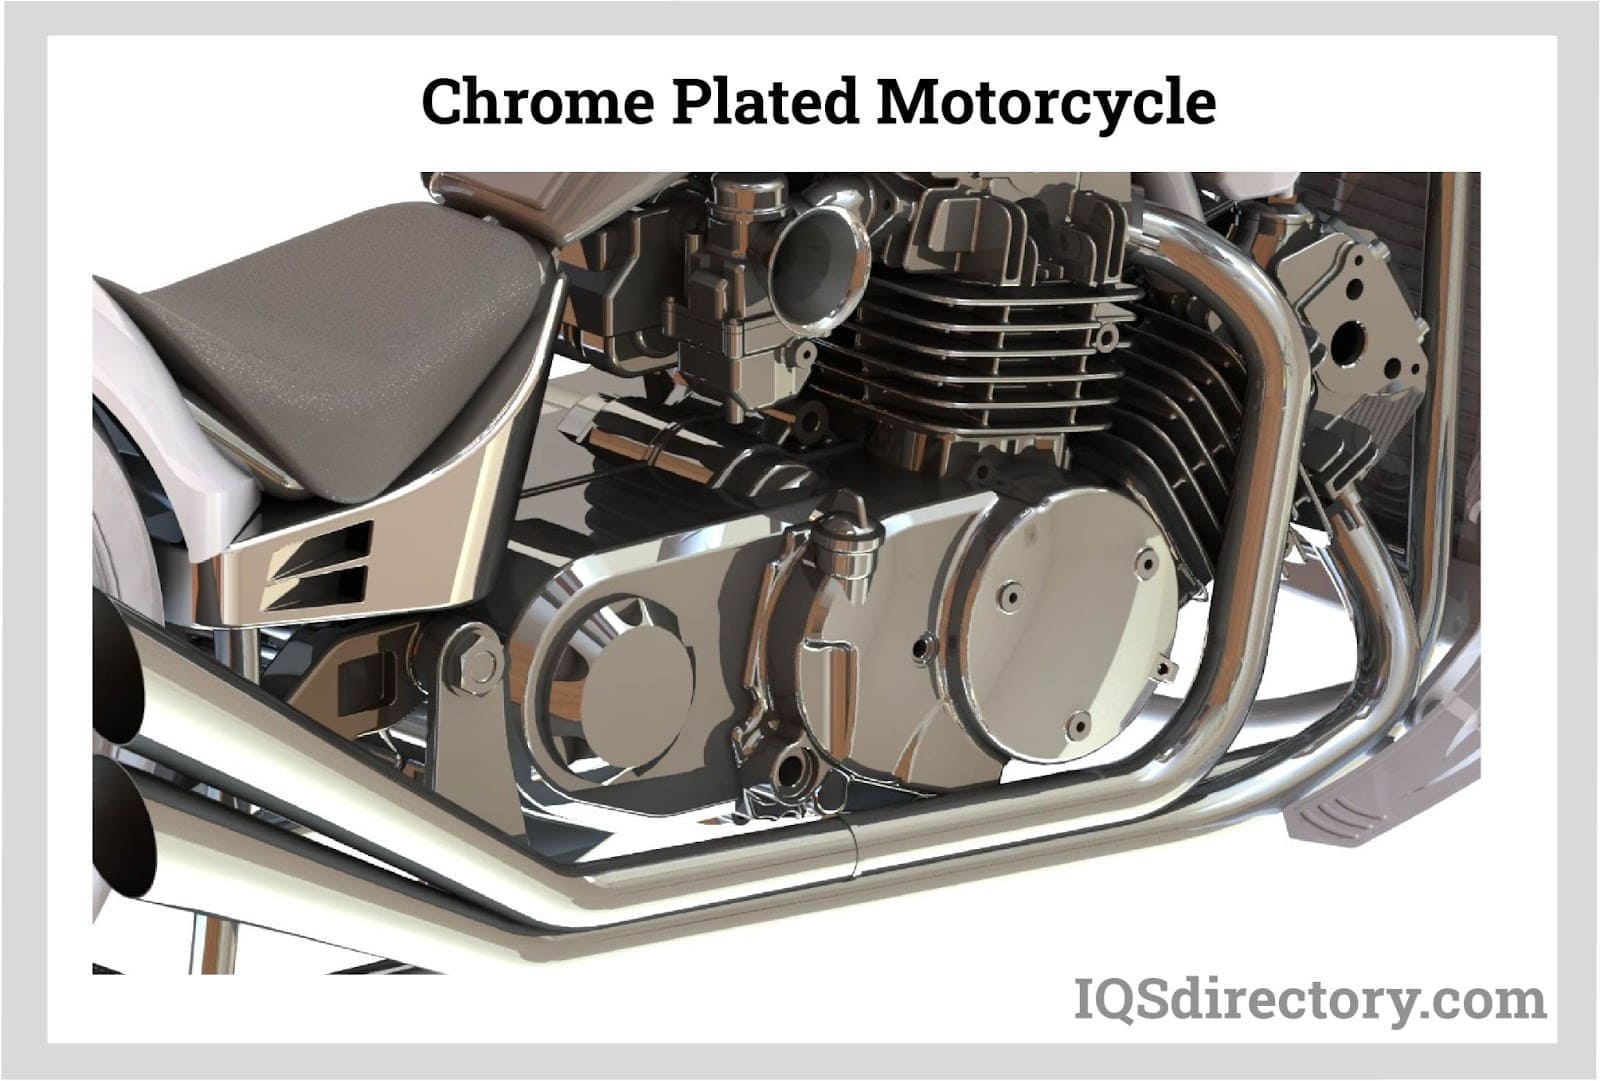 Chrome Plated Motorcycle